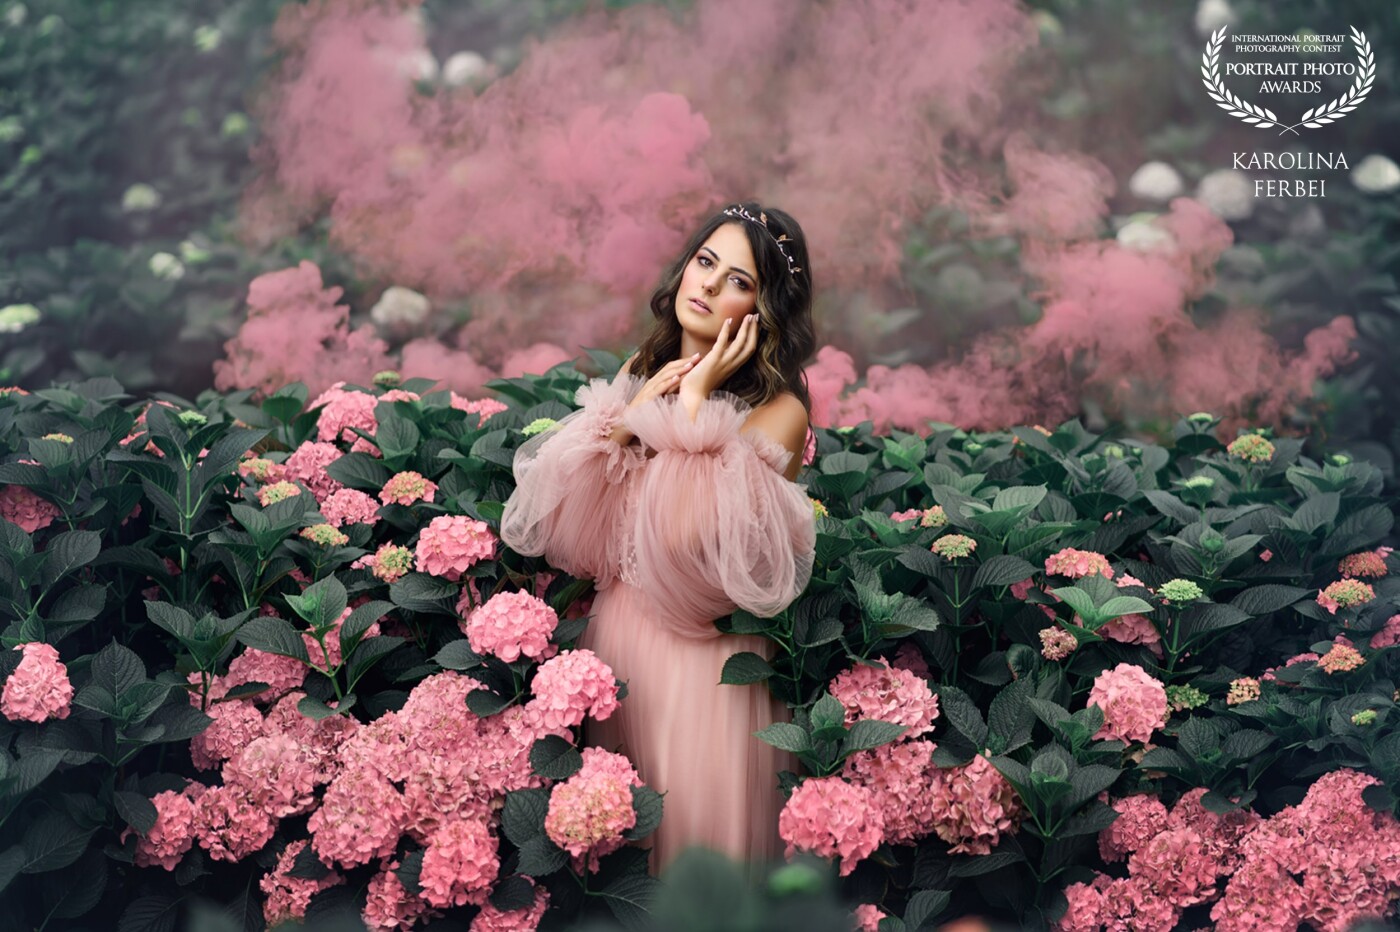 Beautiful Samantha at hydrangea field. This was a collaborative shoot with hydrangea field's owner, as it is not a public space, but private farm Te Puna Blooms. We caught a perfect moment of pink hydrangeas in full bloom. <br />
Venue @tepunablooms ​​​​​​​​​​​​​​​​<br />
Model Samantha ​​​​​​<br />
Makeup and hair @lissyadriana_hairandmakeup​​​​​​​​